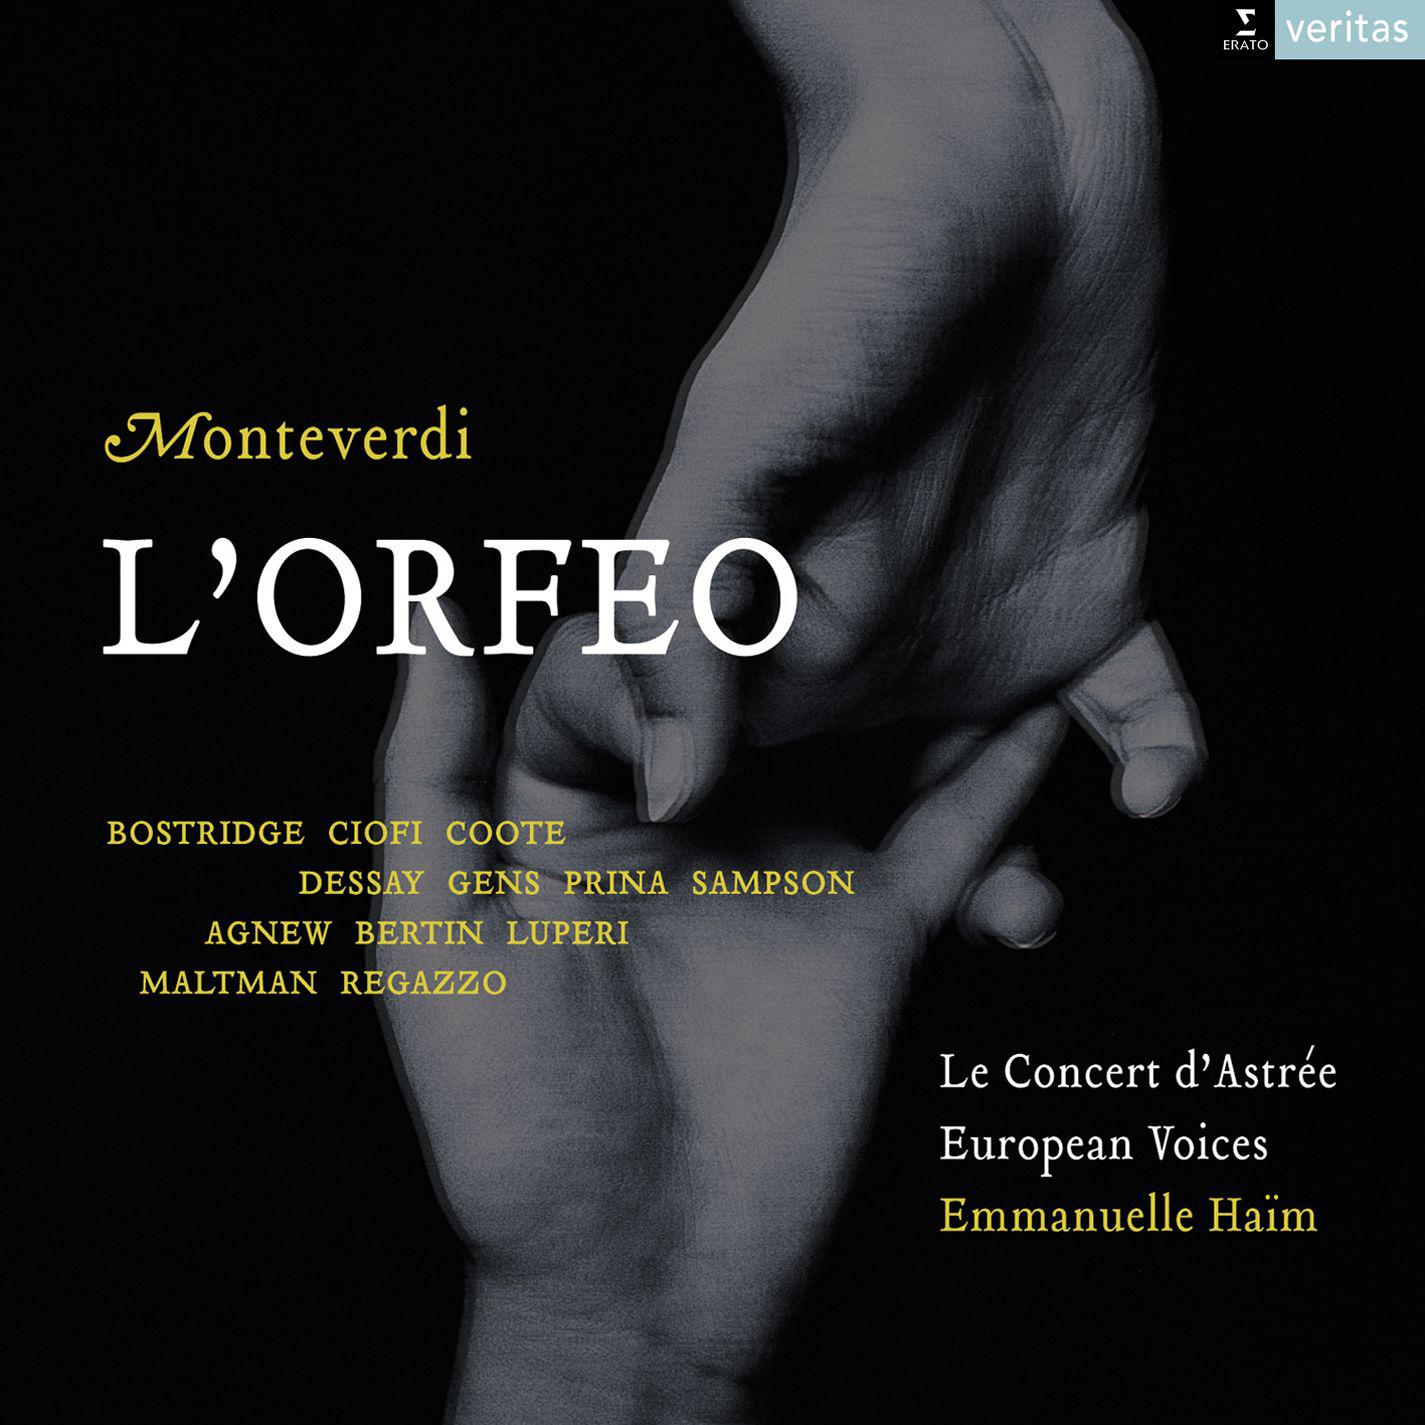 L'Orfeo, favola in musica, SV 318, Act 5: Sinfonia